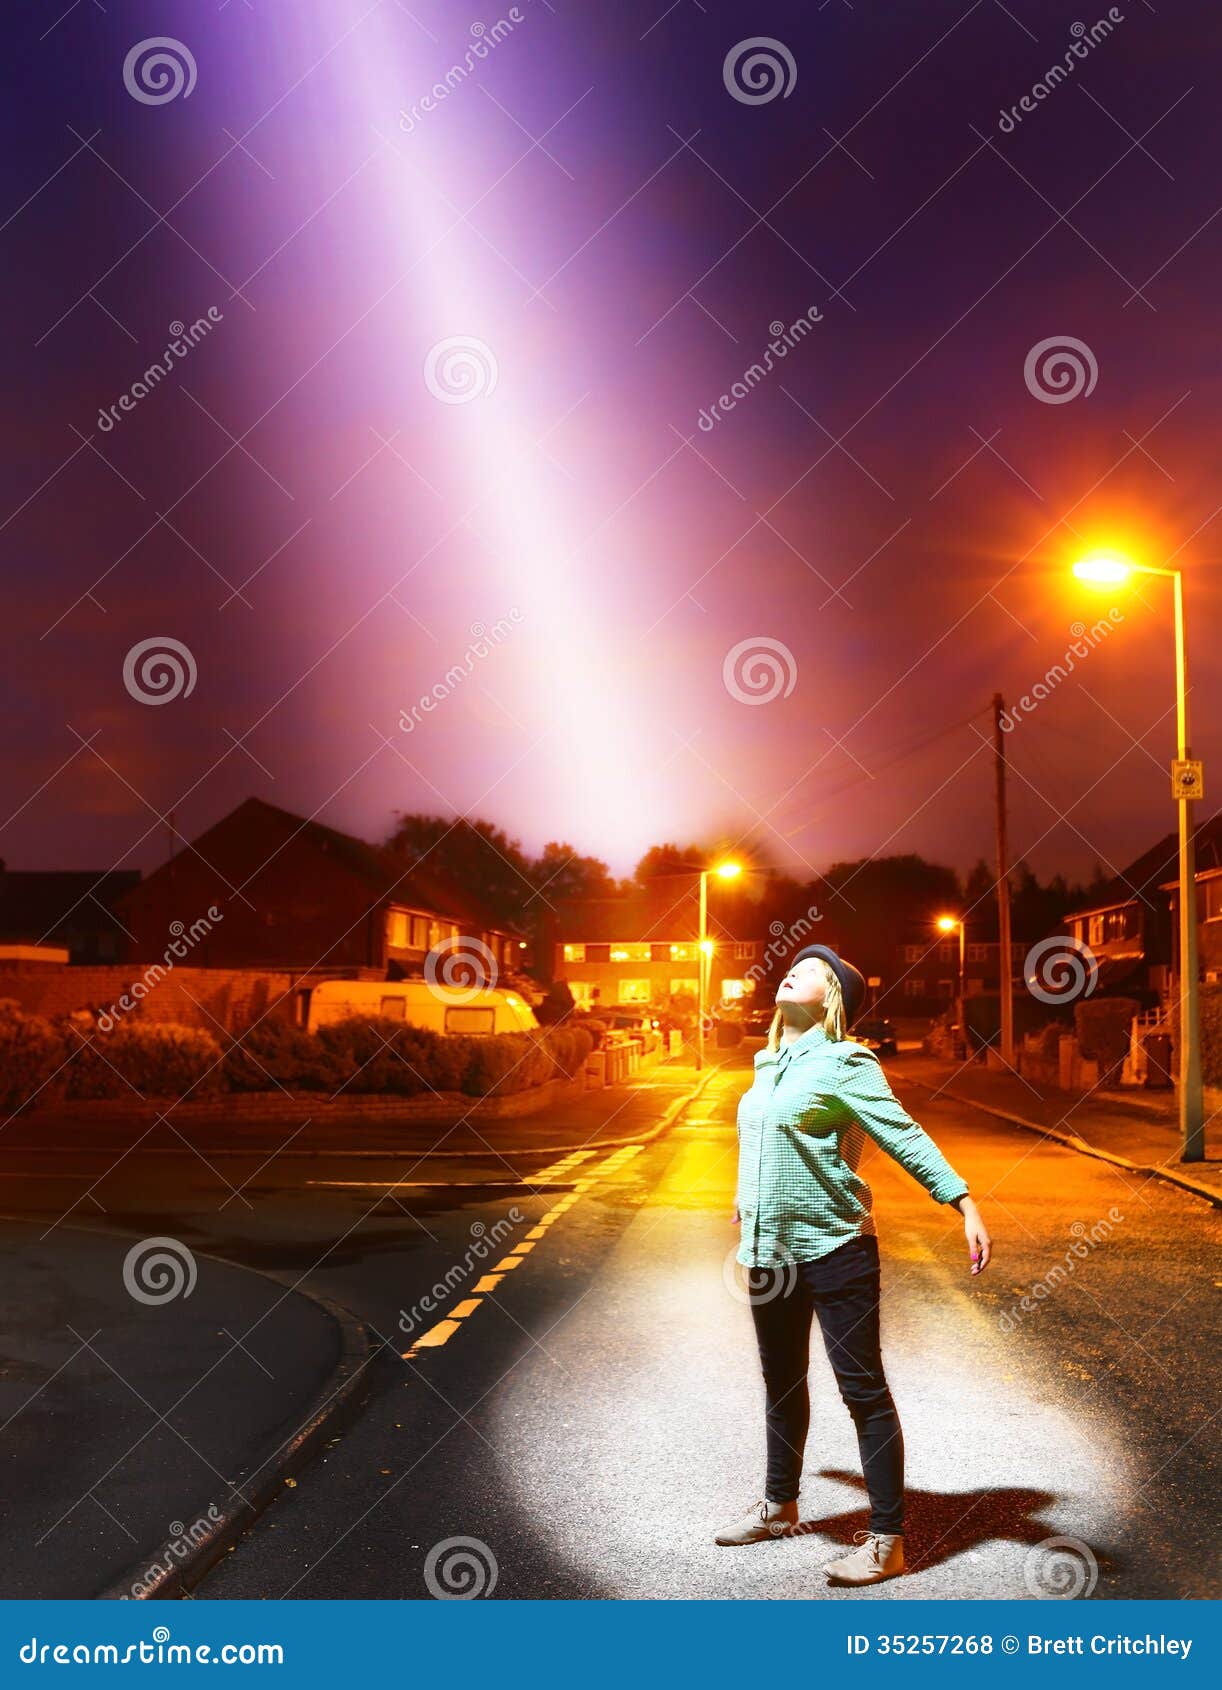 Heavenly light from stock Image of rays - 35257268